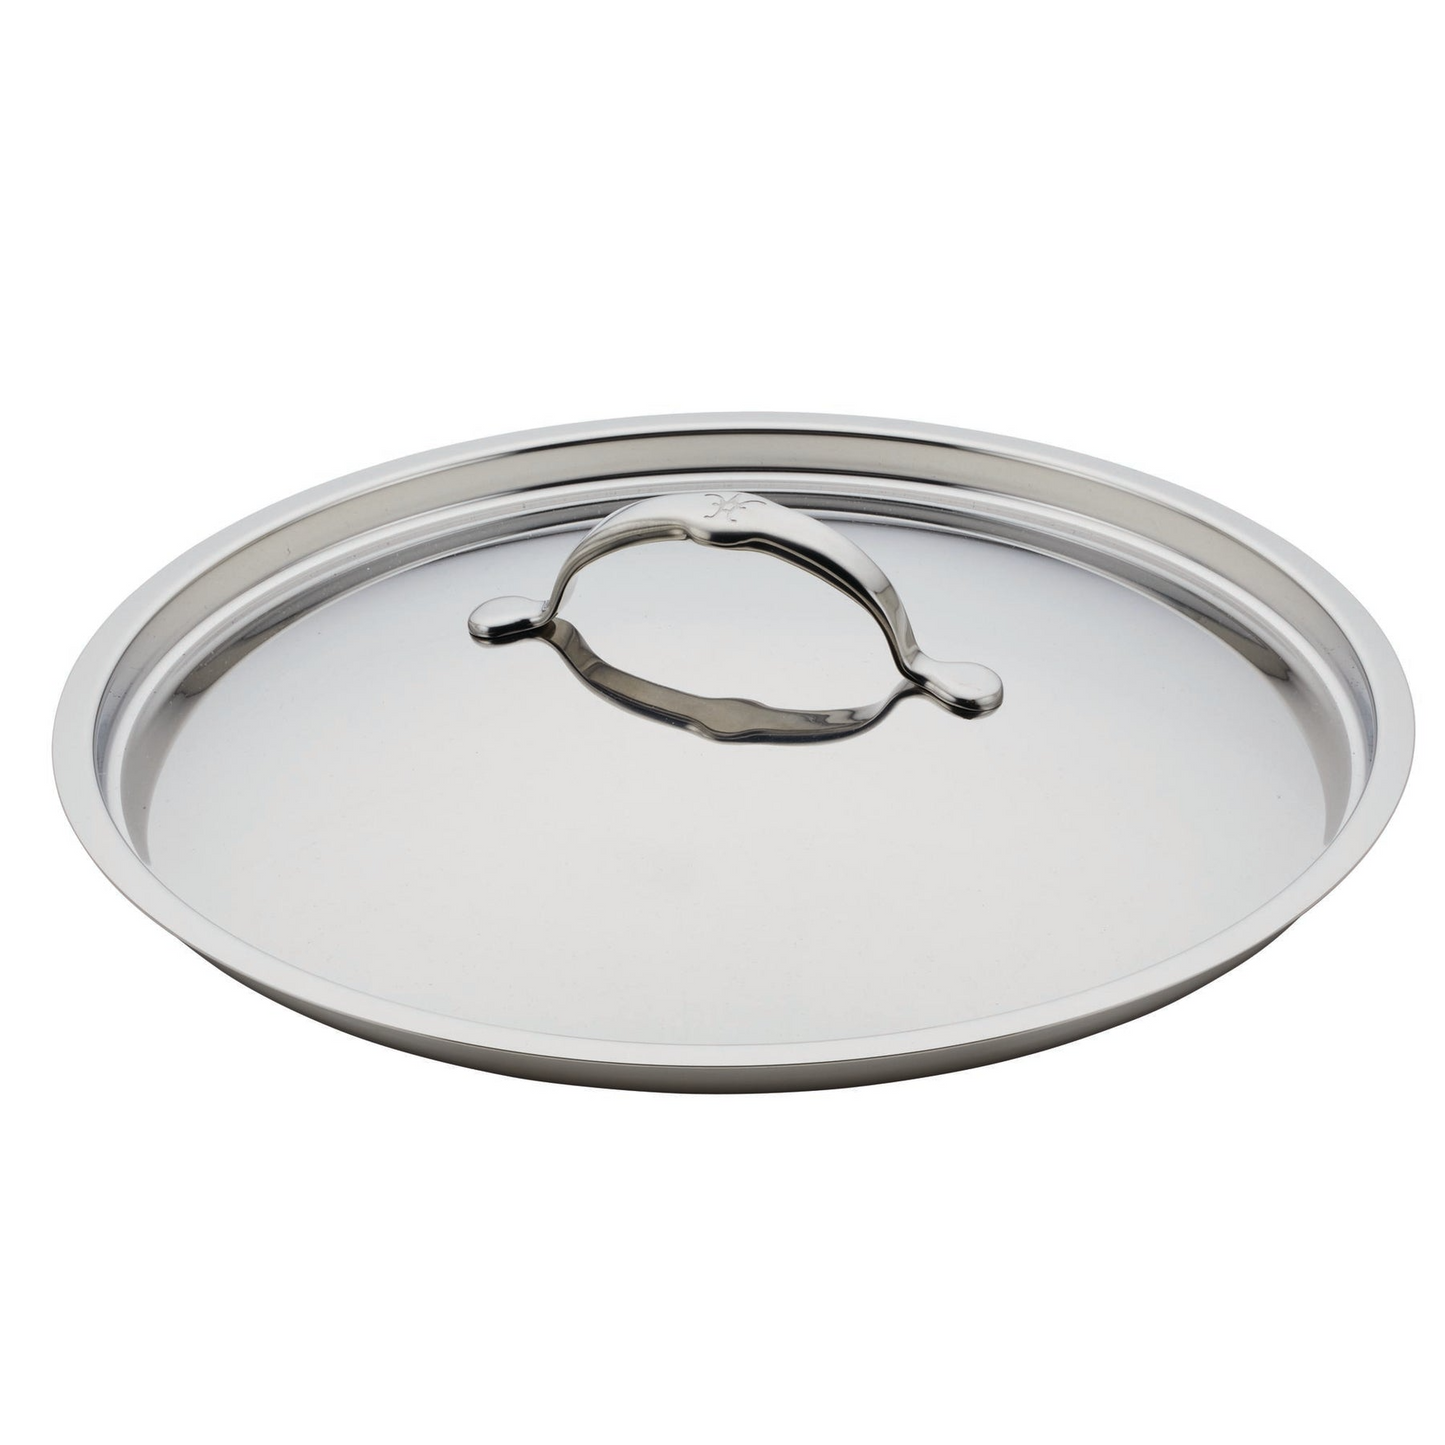 Provisions Stainless Steel Lids By Hestan